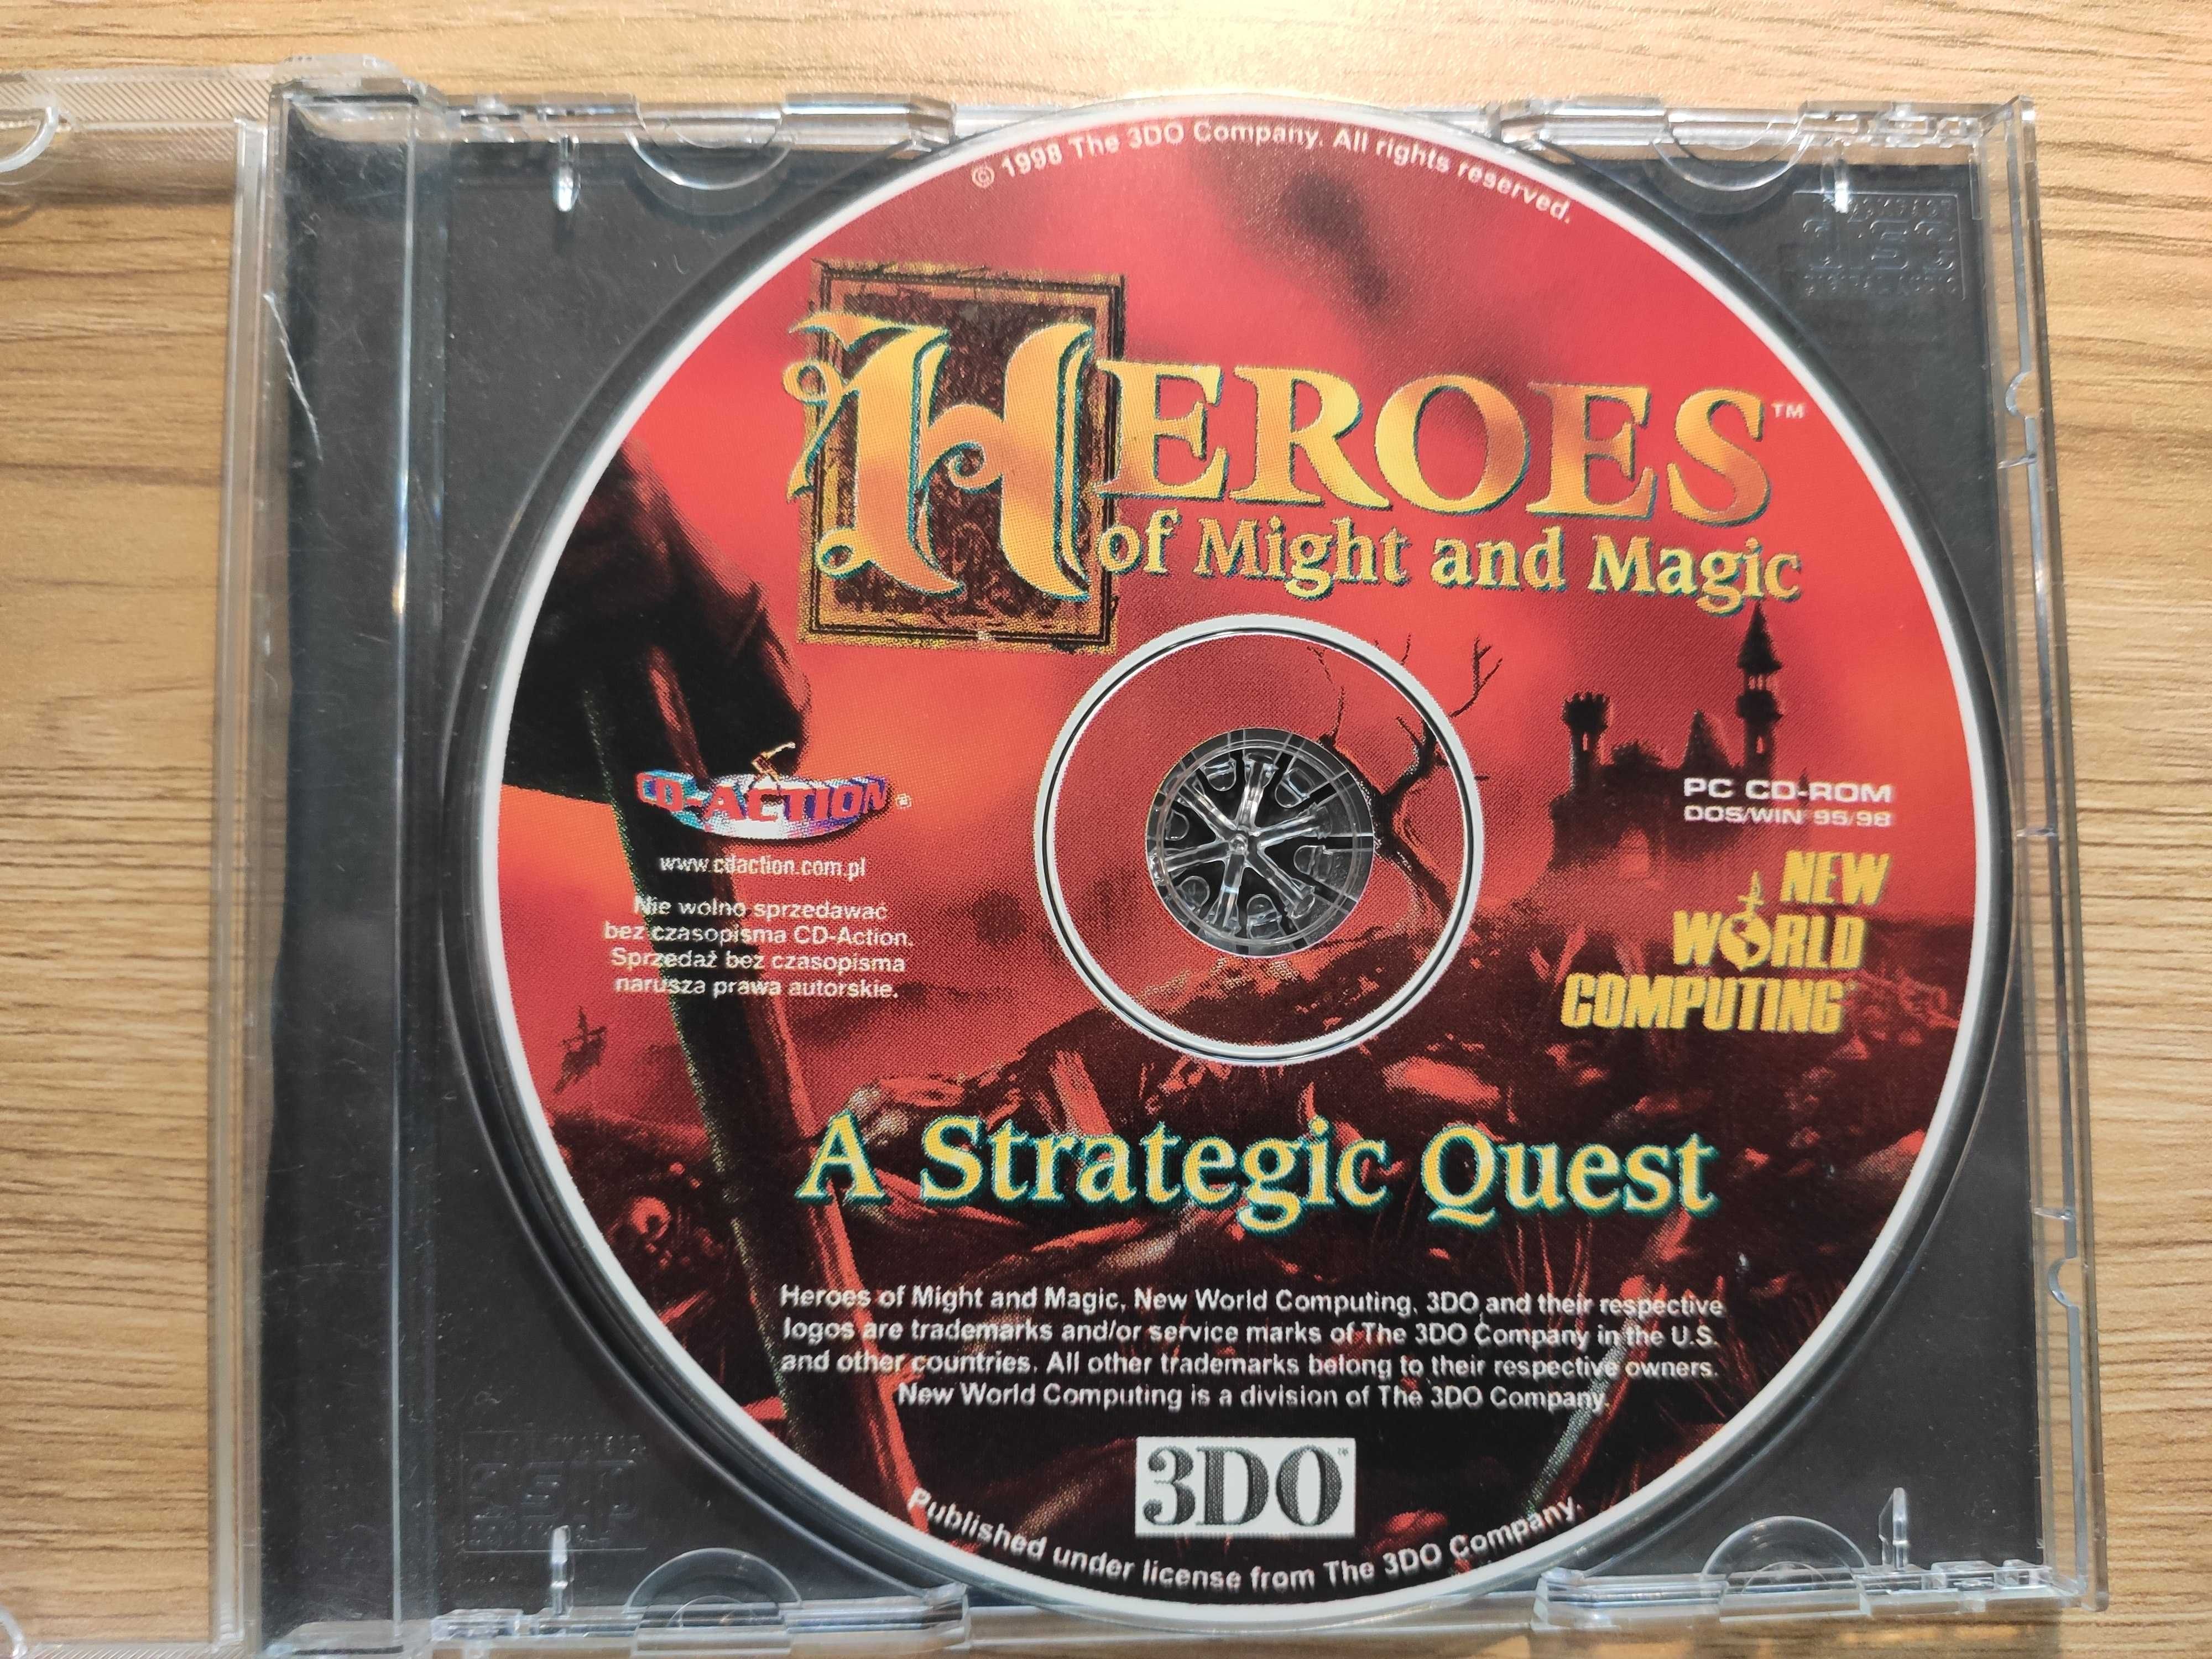 Heroes of might and magic - gra PC cd-action